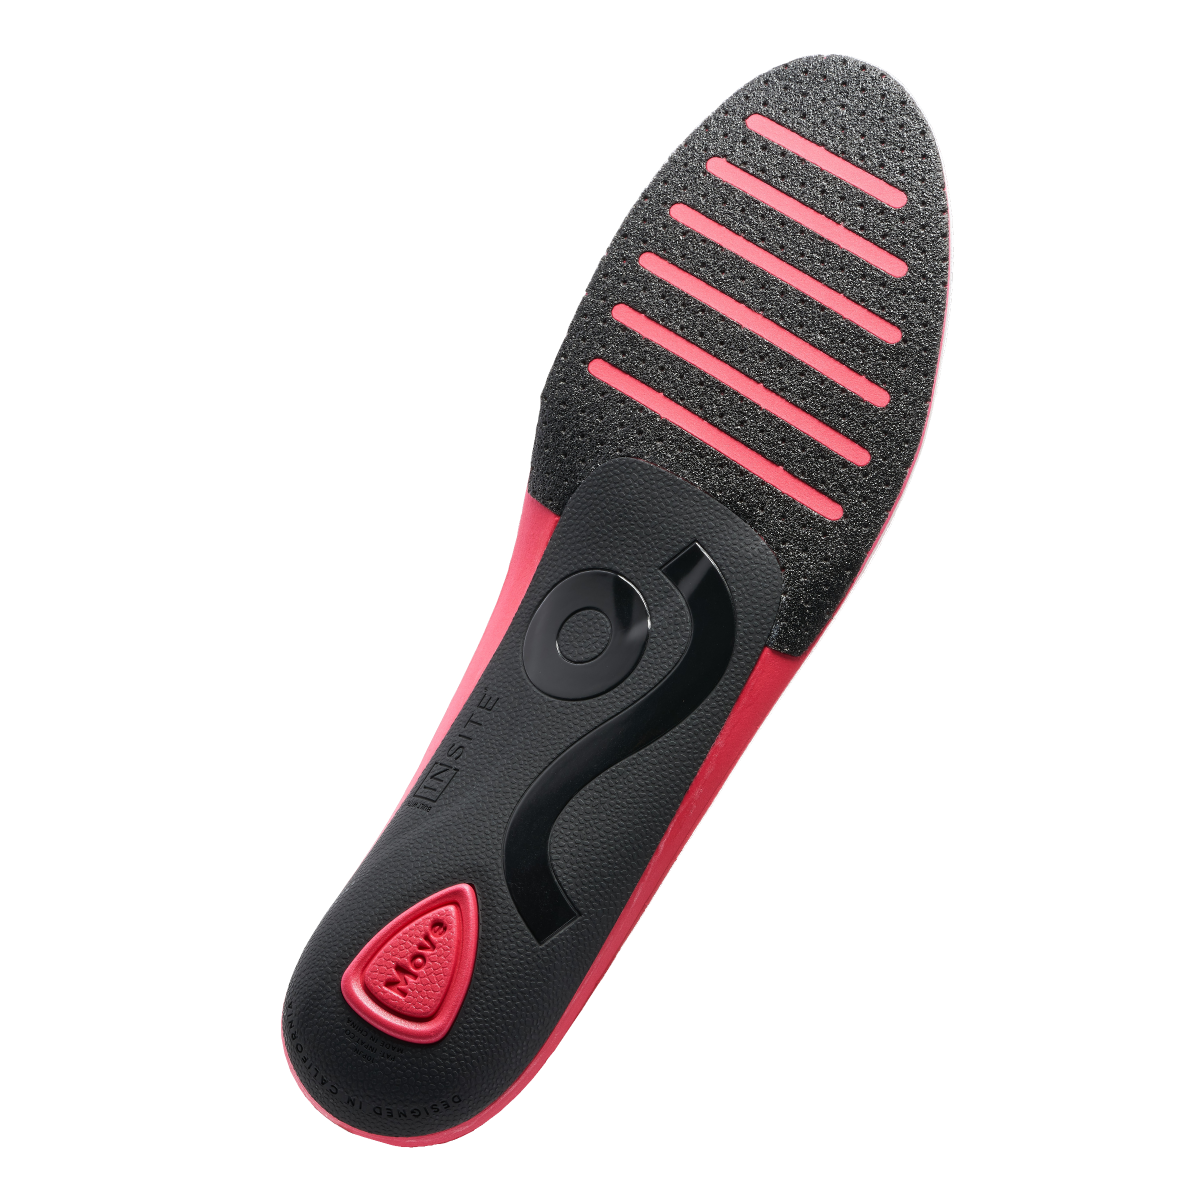 GameDay Pro Insoles - Top